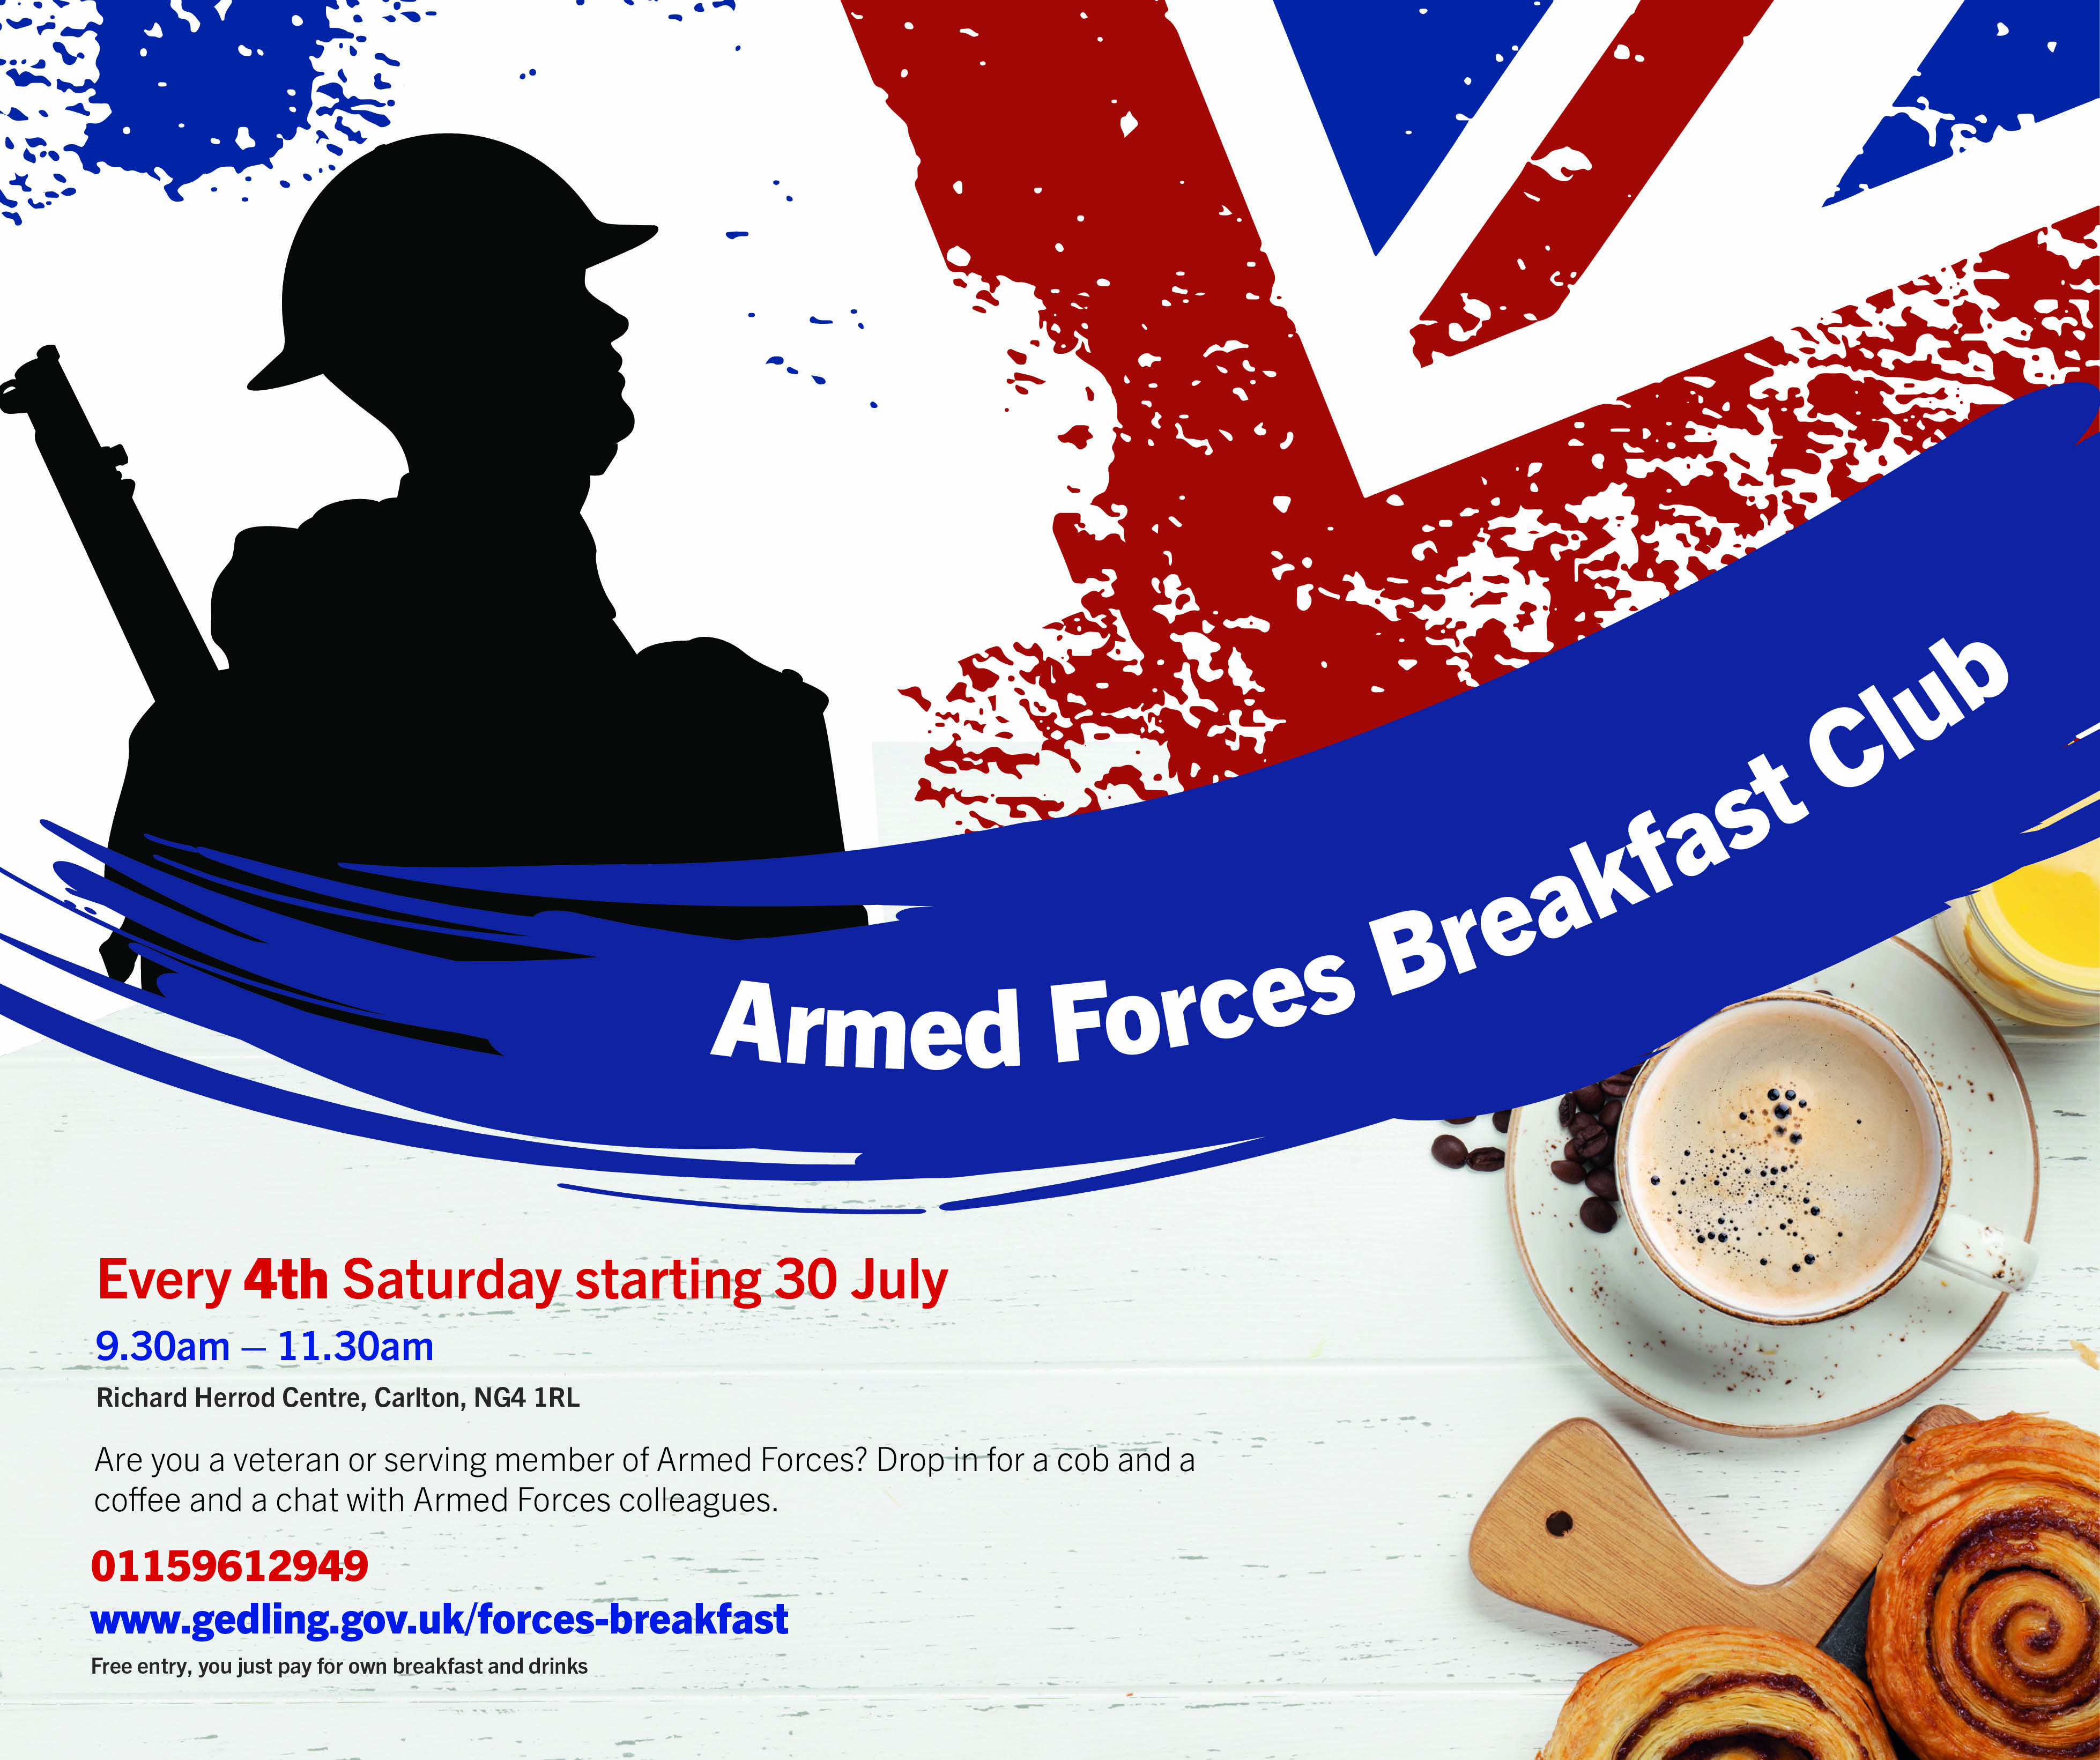 Soldier silhouette and the details of the event with a British flag and a cup of coffee